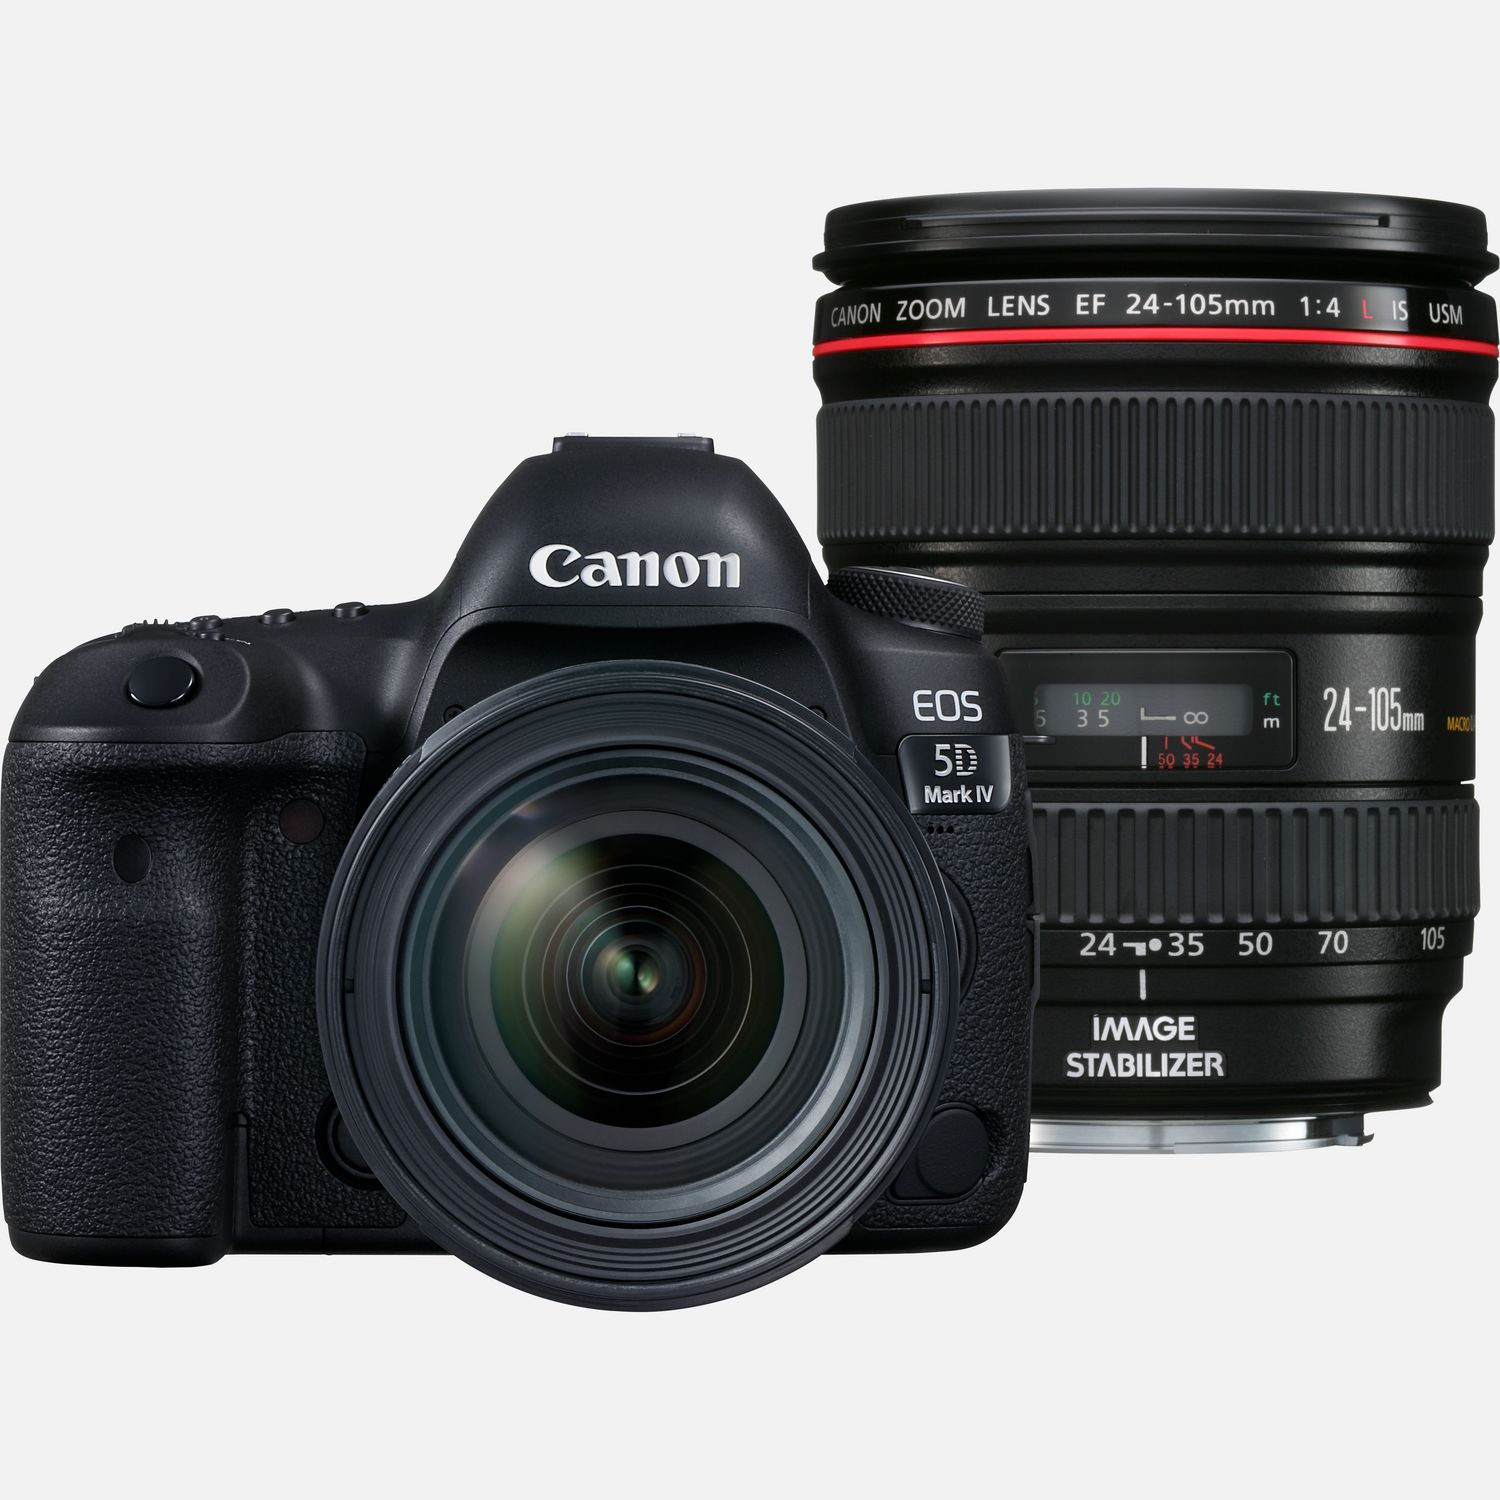 Canon EOS 5D Mark IV + EF 24-105mm IS USM Lens in Wi-Fi Cameras at Canon